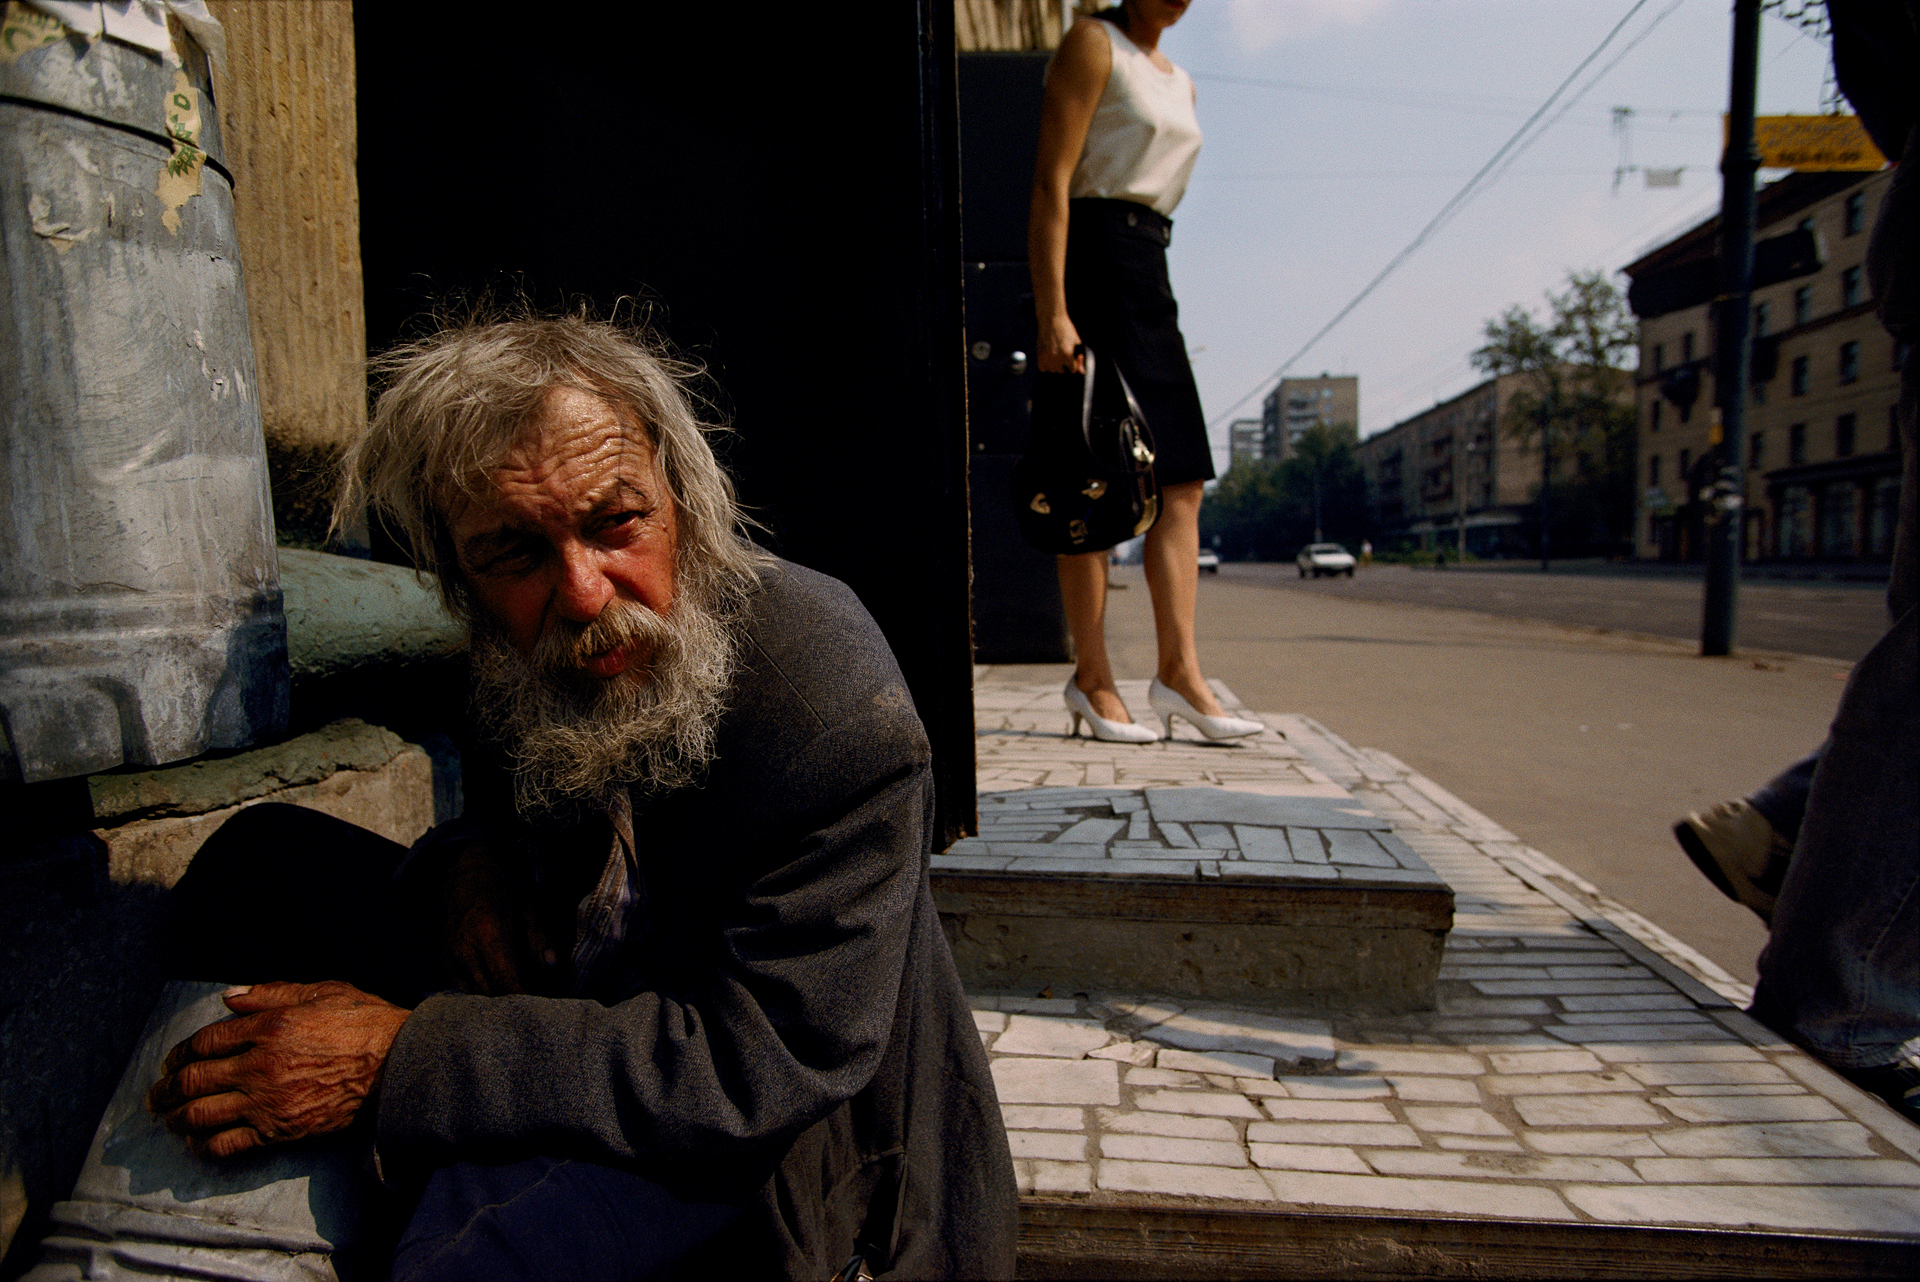  In the early 1990s, the homeless became a feature of Moscow street life. This man was evicted from his apartment by his own son, who decided he needed the space for his live-in girlfriend.  Moscow, Russia  